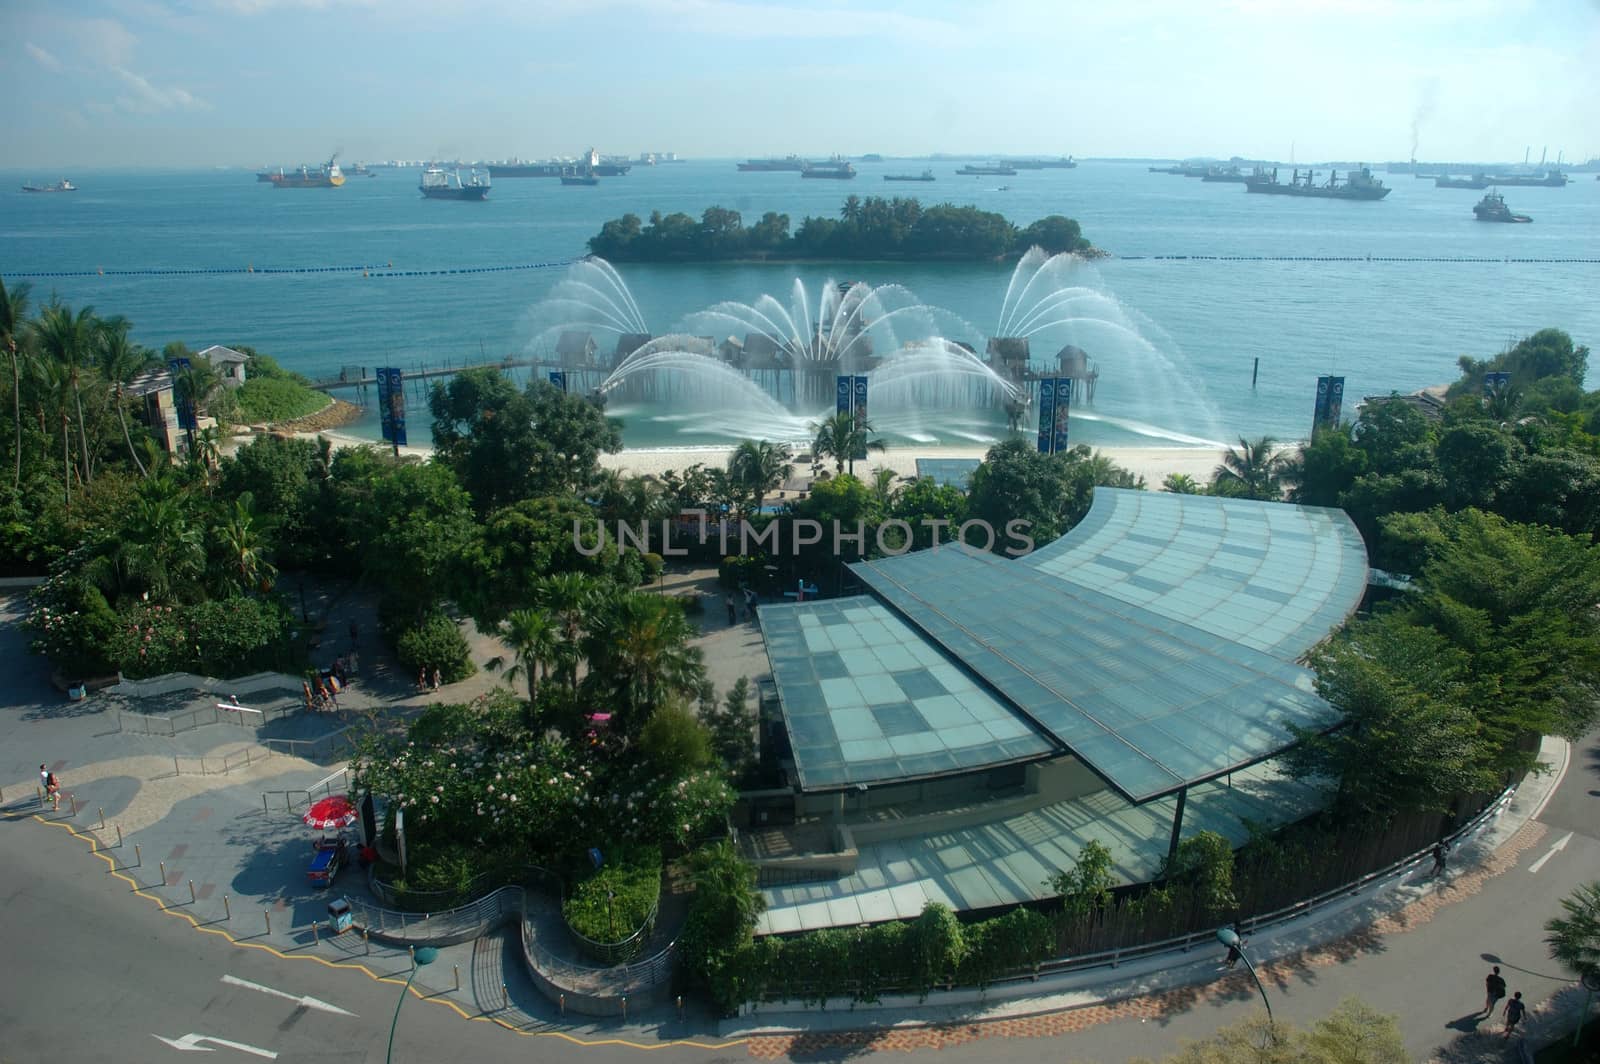 Resort World Sentosa, Singapore - April 13, 2013: Songs of the Sea was a multimedia show located at Siloso Beach on Sentosa Island, Singapore.